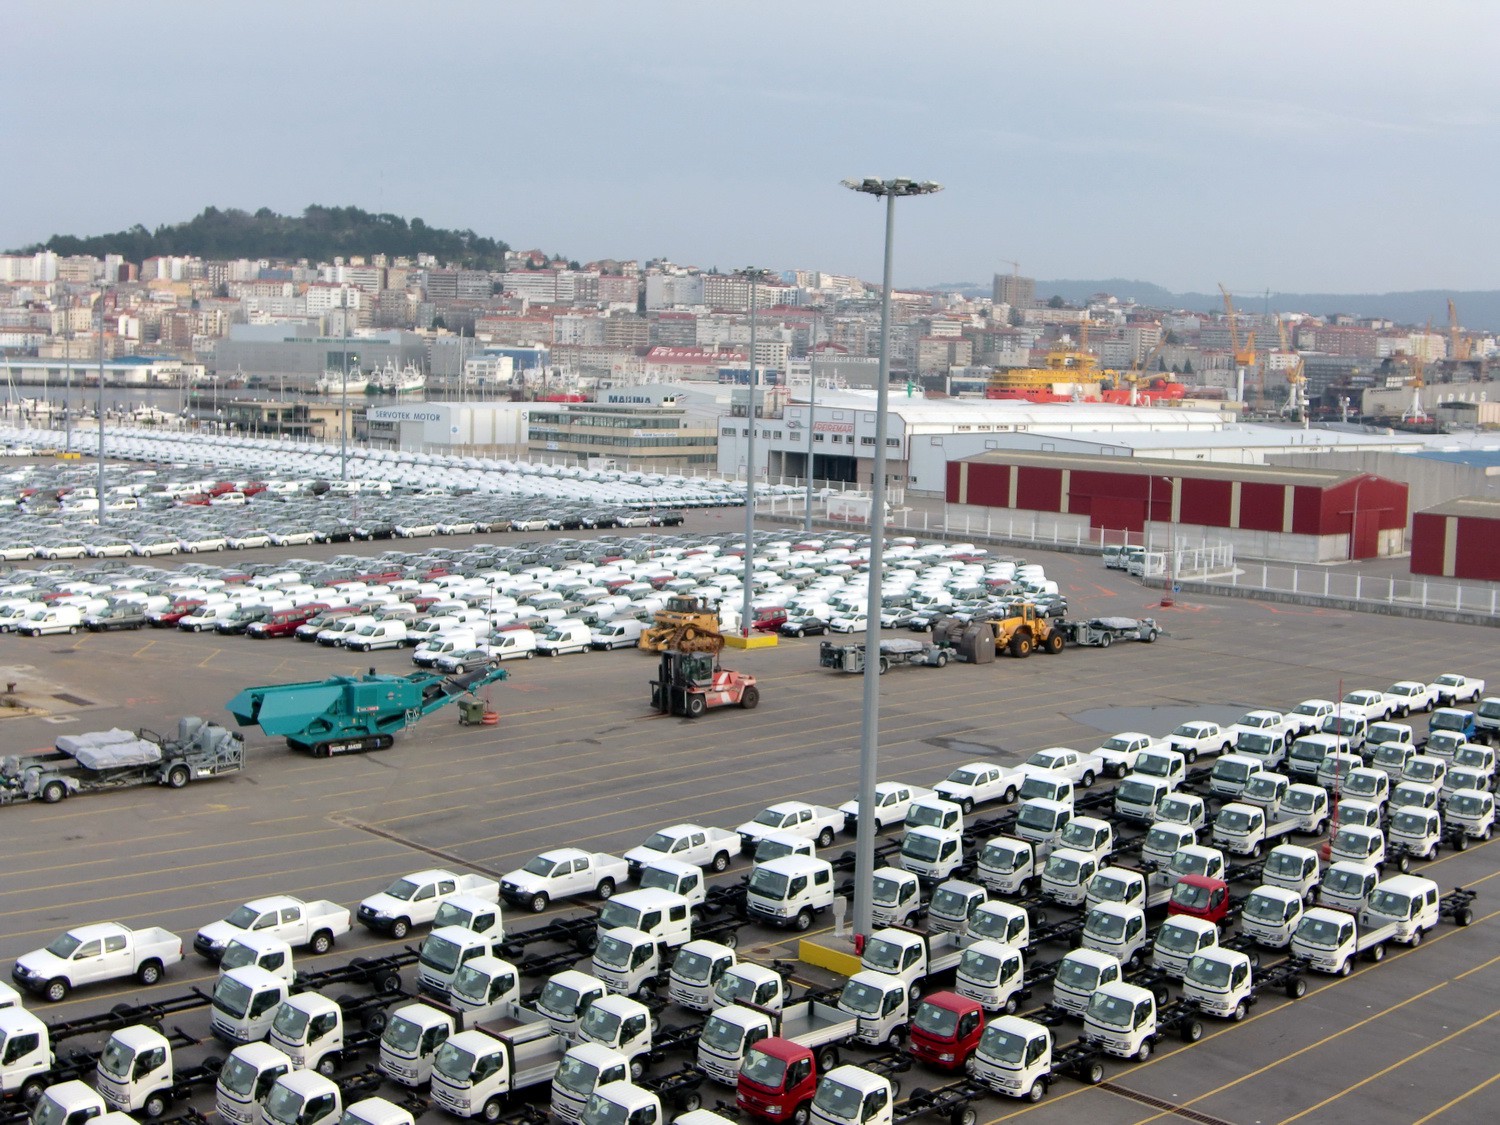 The port of Vigo - a lot of brandnew cars. The city is in the background